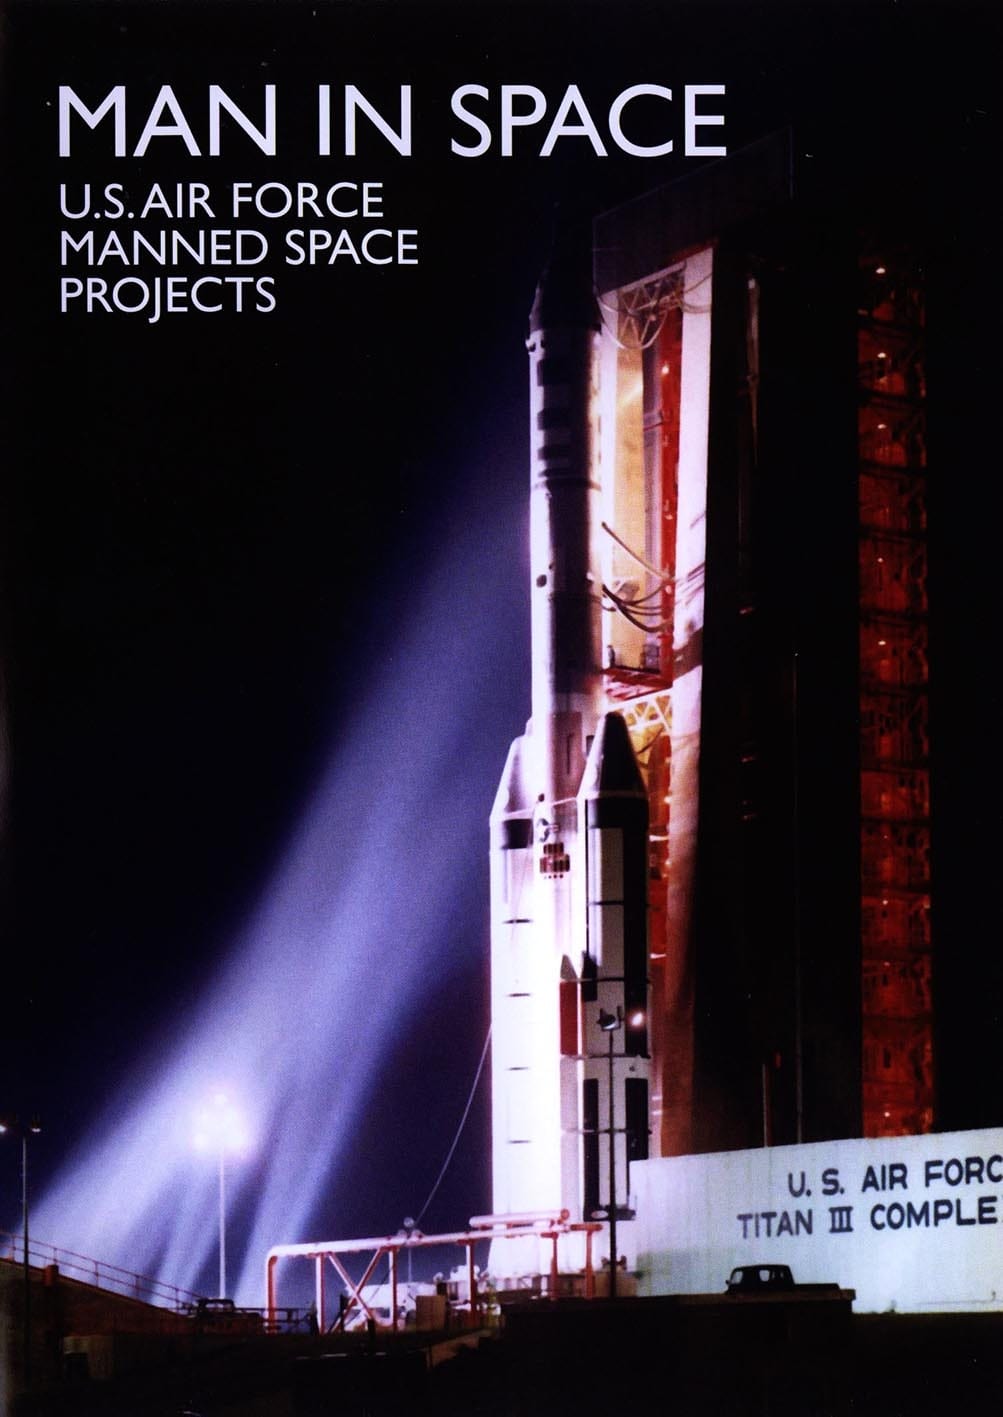 Man in Space: U.S. Air Force Manned Space Projects